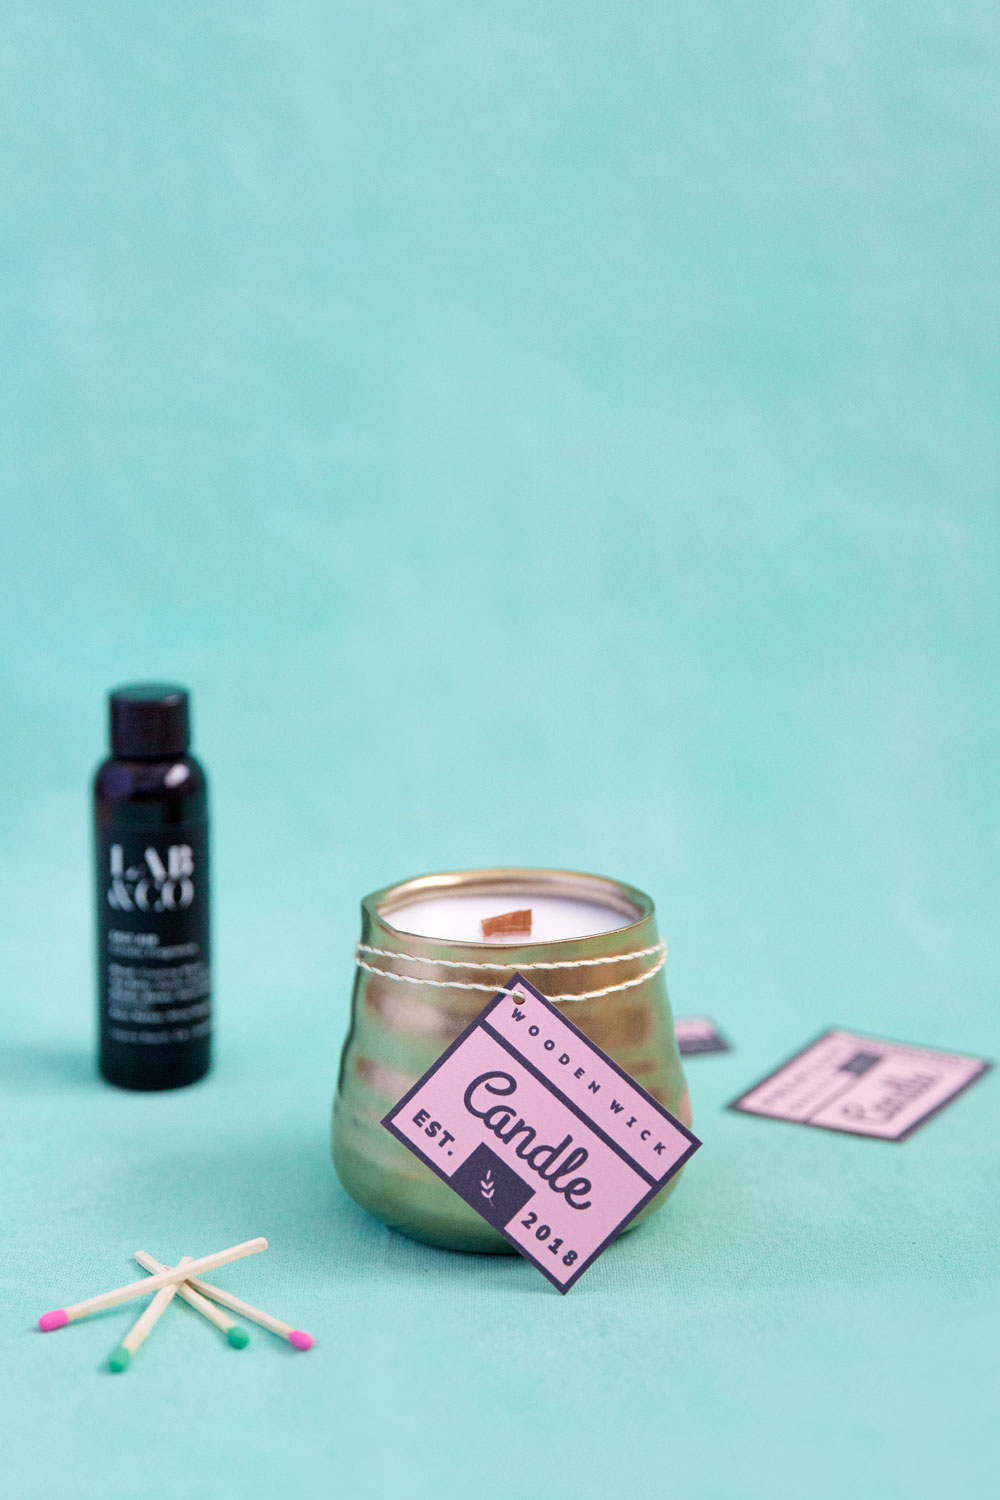 Learn how to make these amazing DIY luxury candles with this amazing company Lab & co.